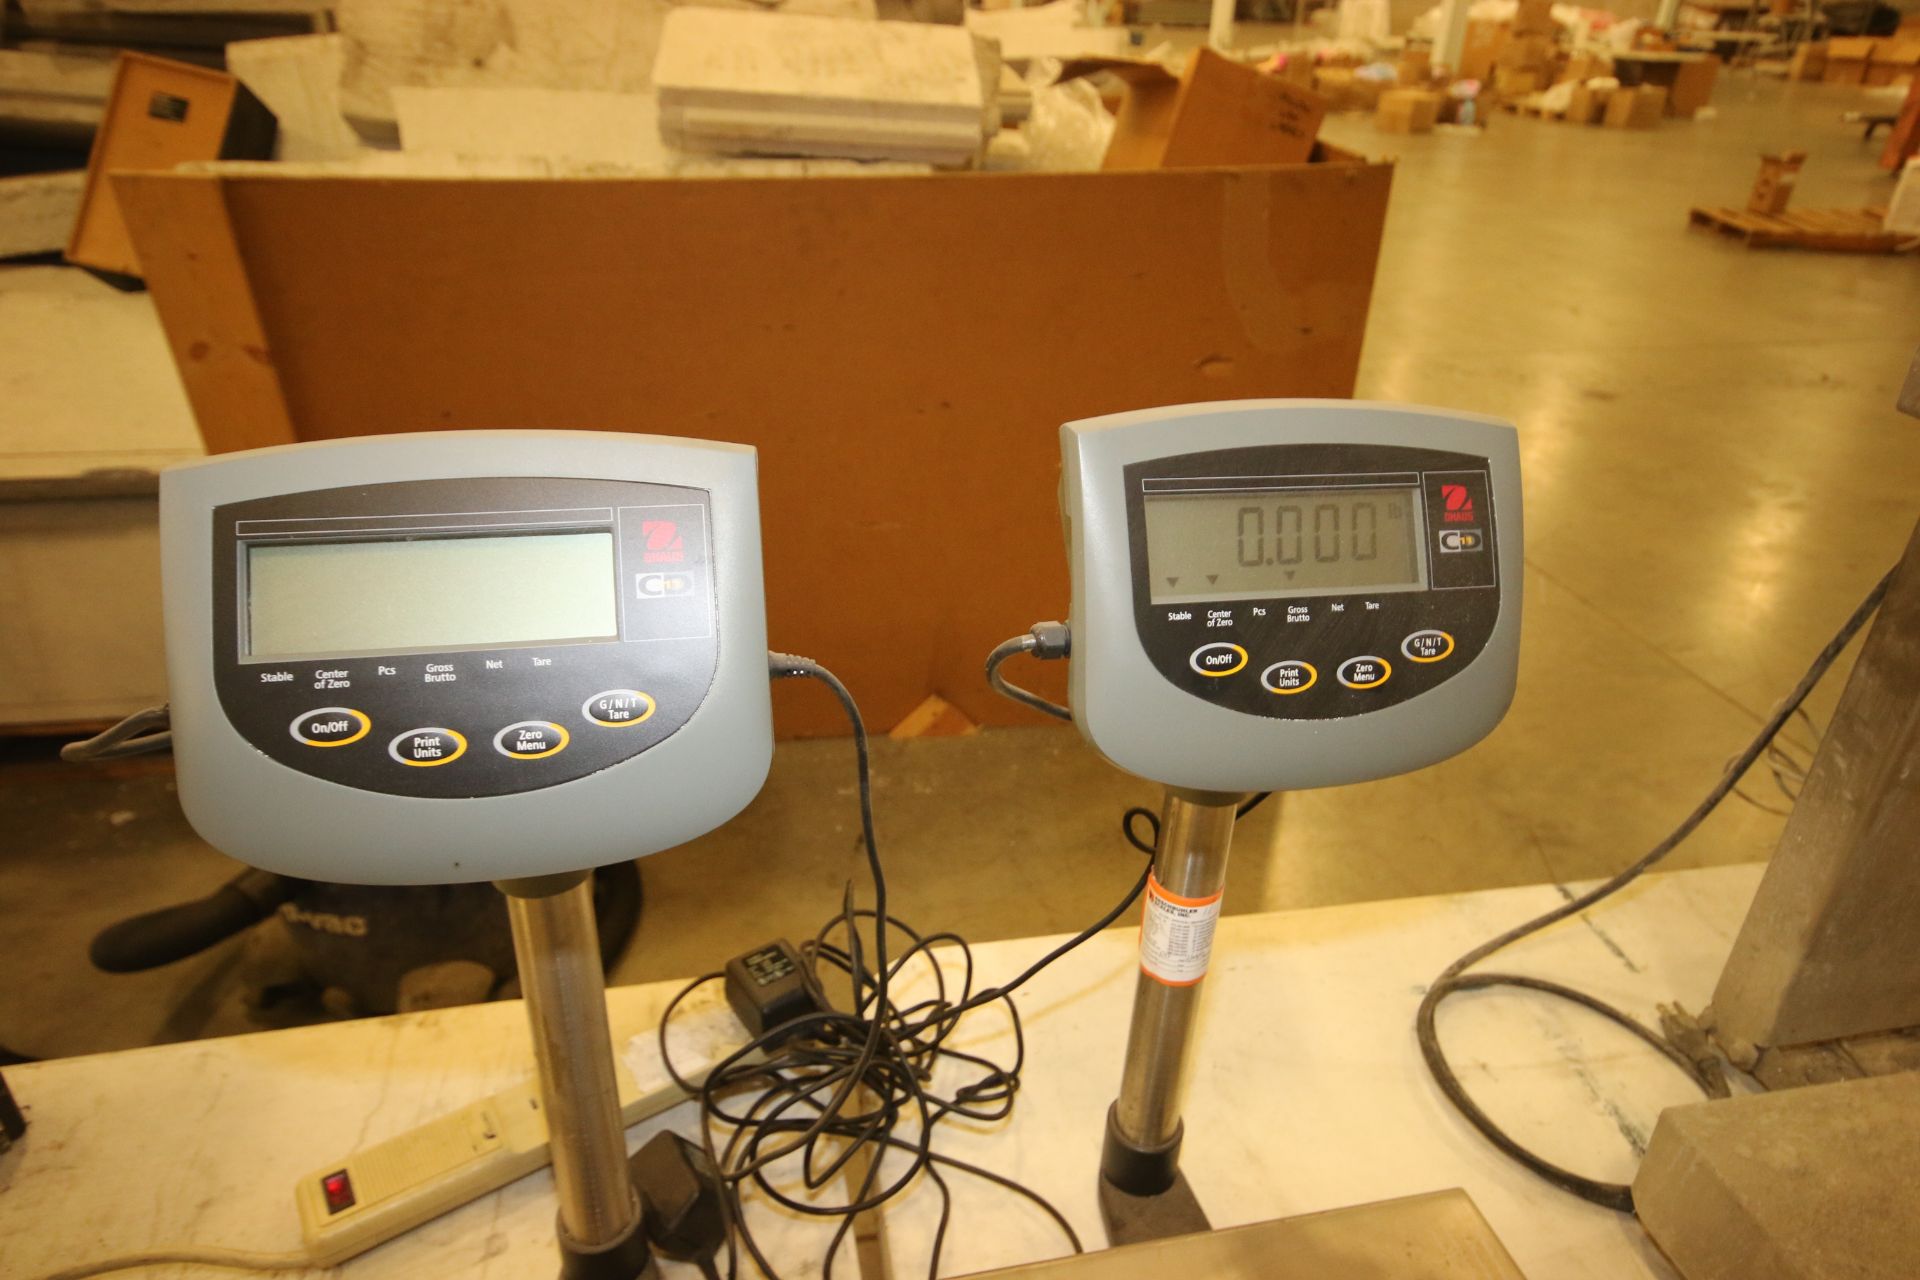 Ohaus S/S Digitial Platform Scales, M/N CD-11, with Digitial Read Outs, Platform Dims.: Aprox. 14" L - Image 2 of 3